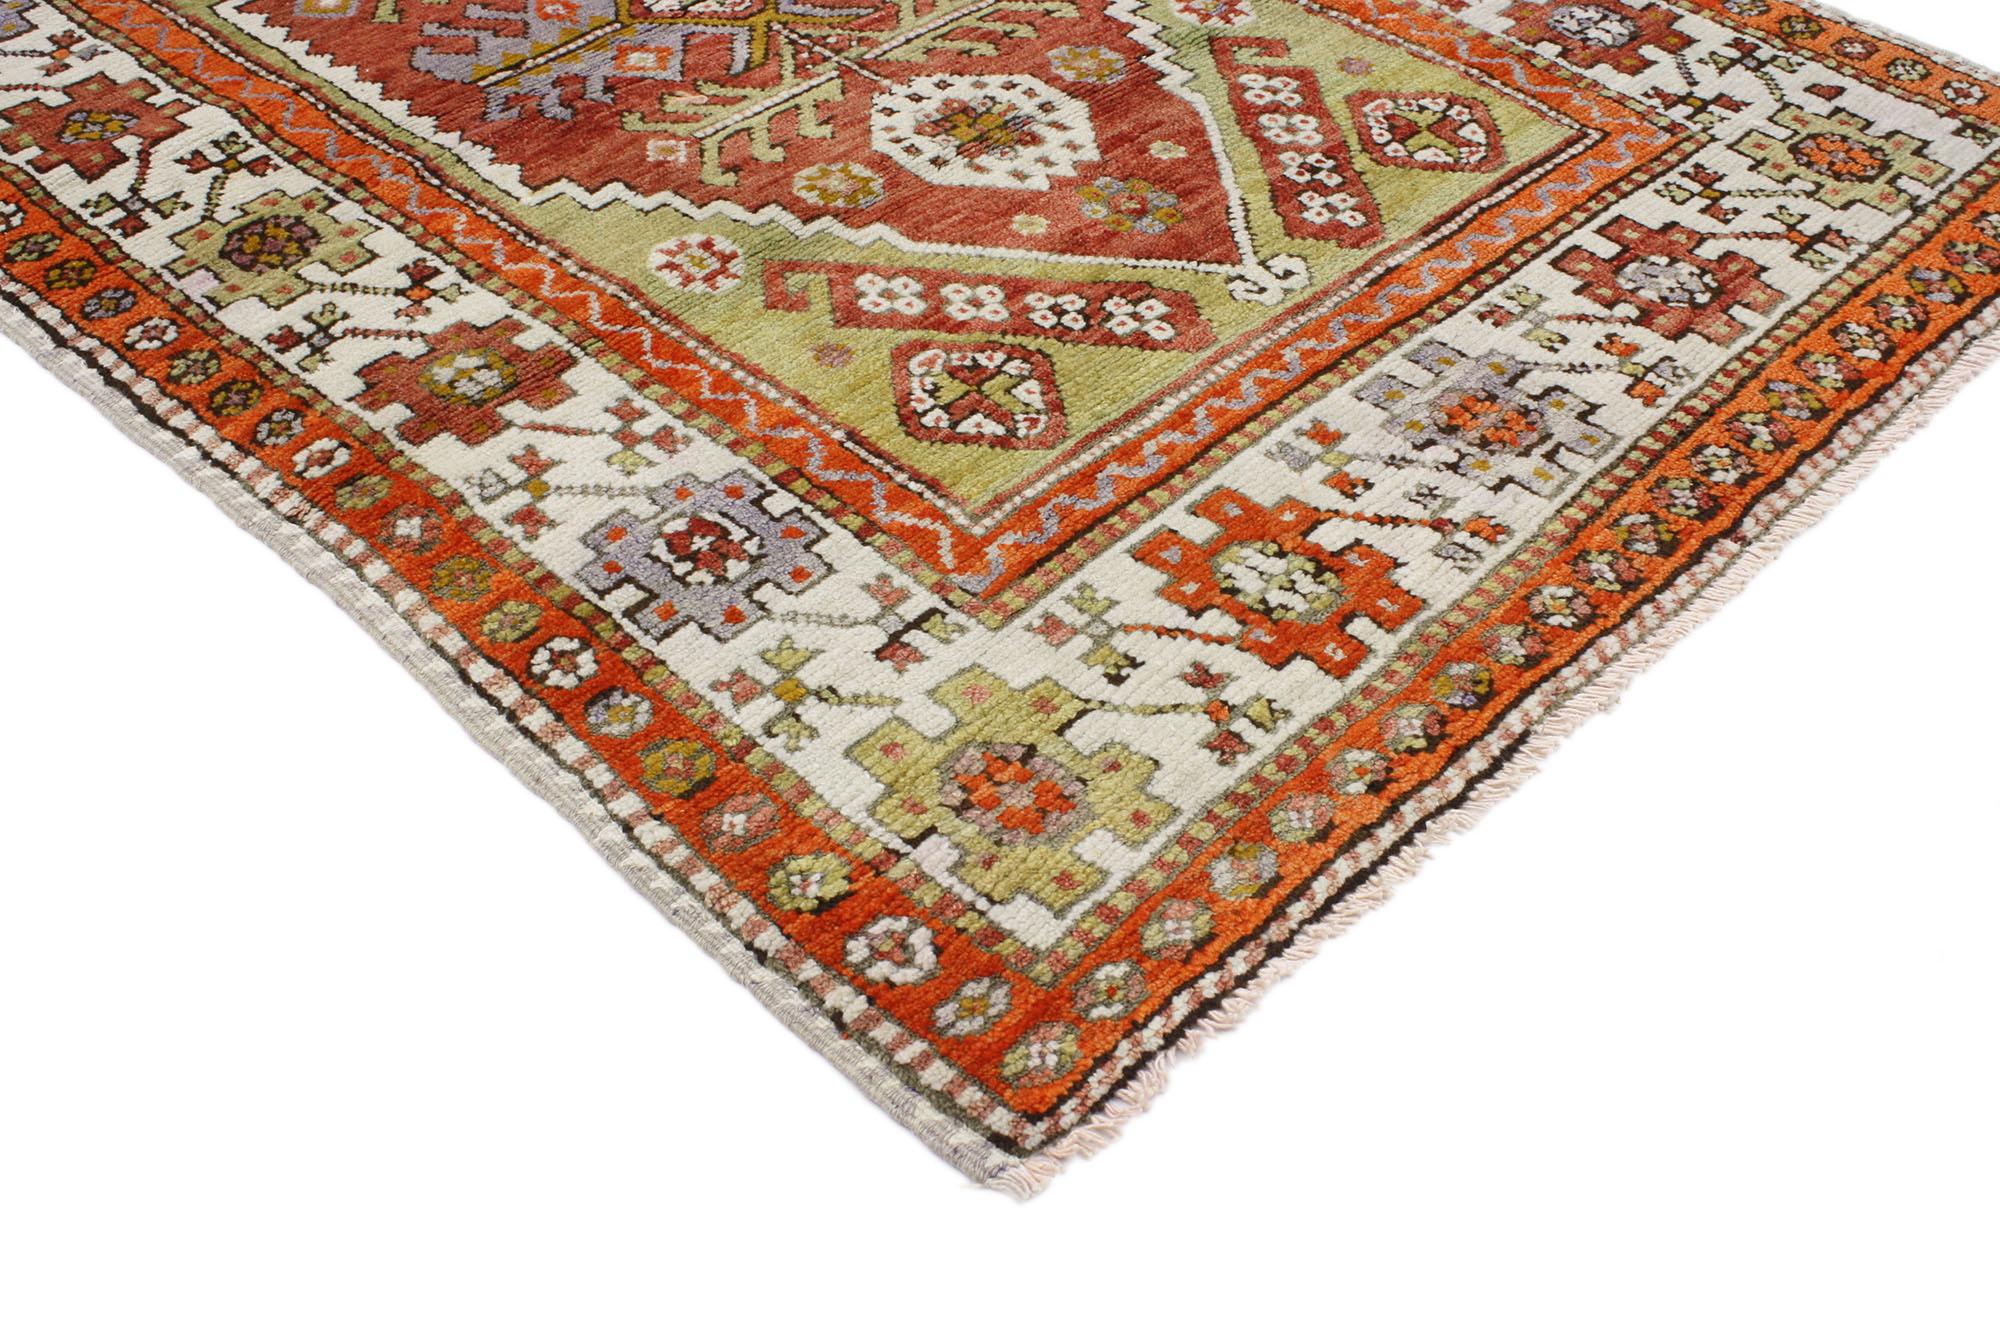 51760 Vintage Turkish Oushak Rug, 03'00 x 04'09.
Colorfully curated meets whimsical boho in this colorful Oushak rug. The eye-catching tribal design and lively colors woven into this piece work together creating a bold, exotic look. The composition